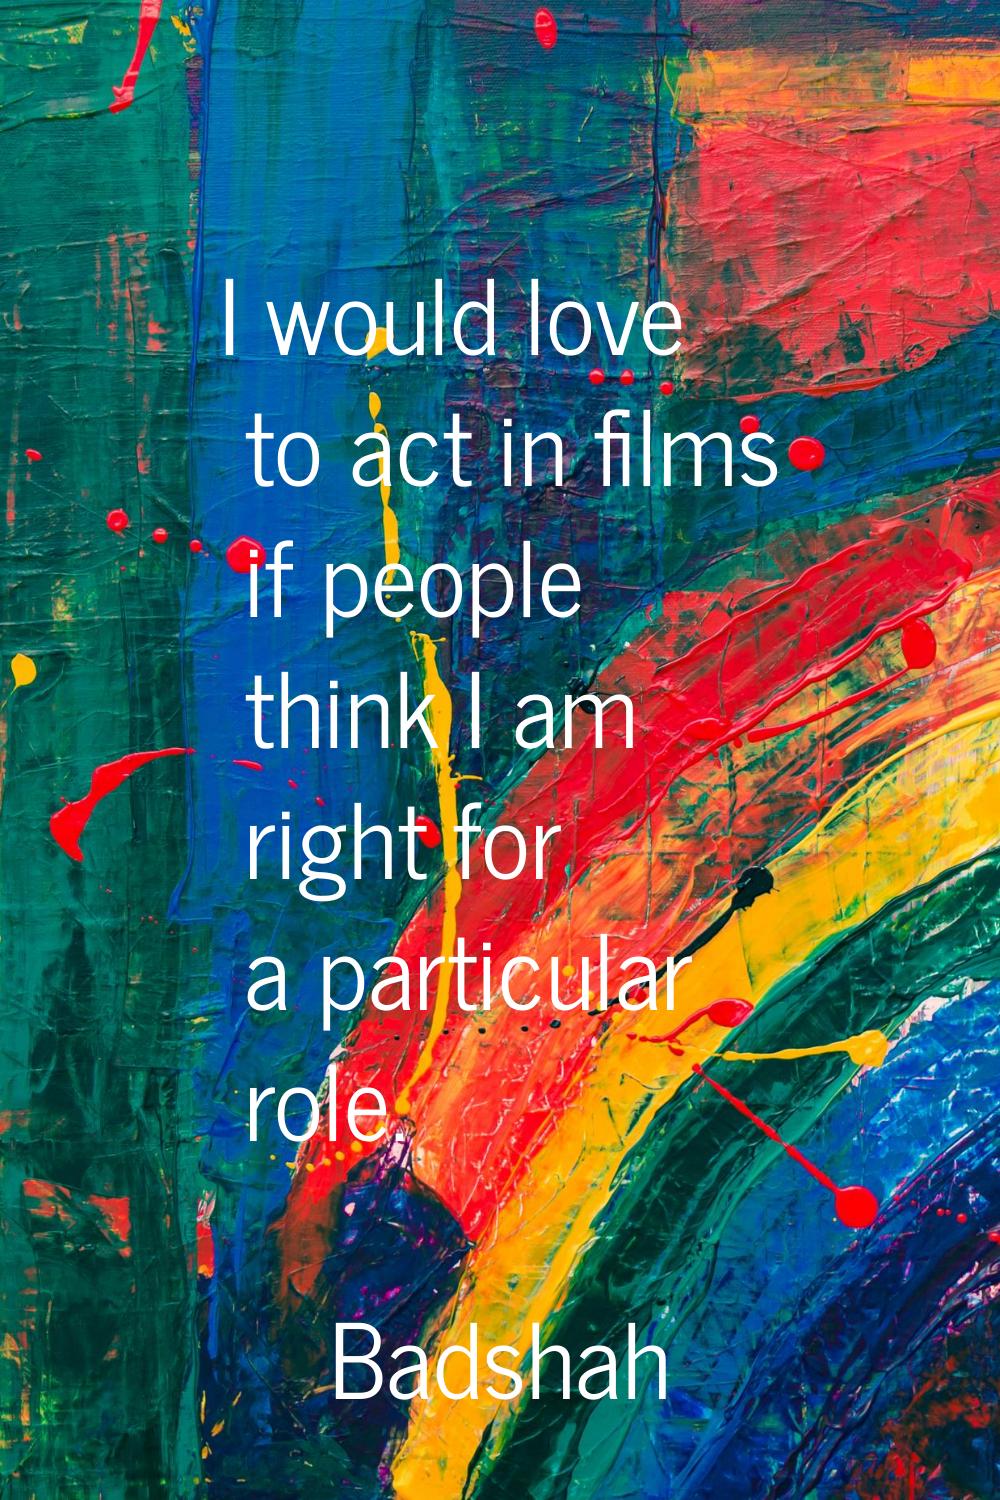 I would love to act in films if people think I am right for a particular role.